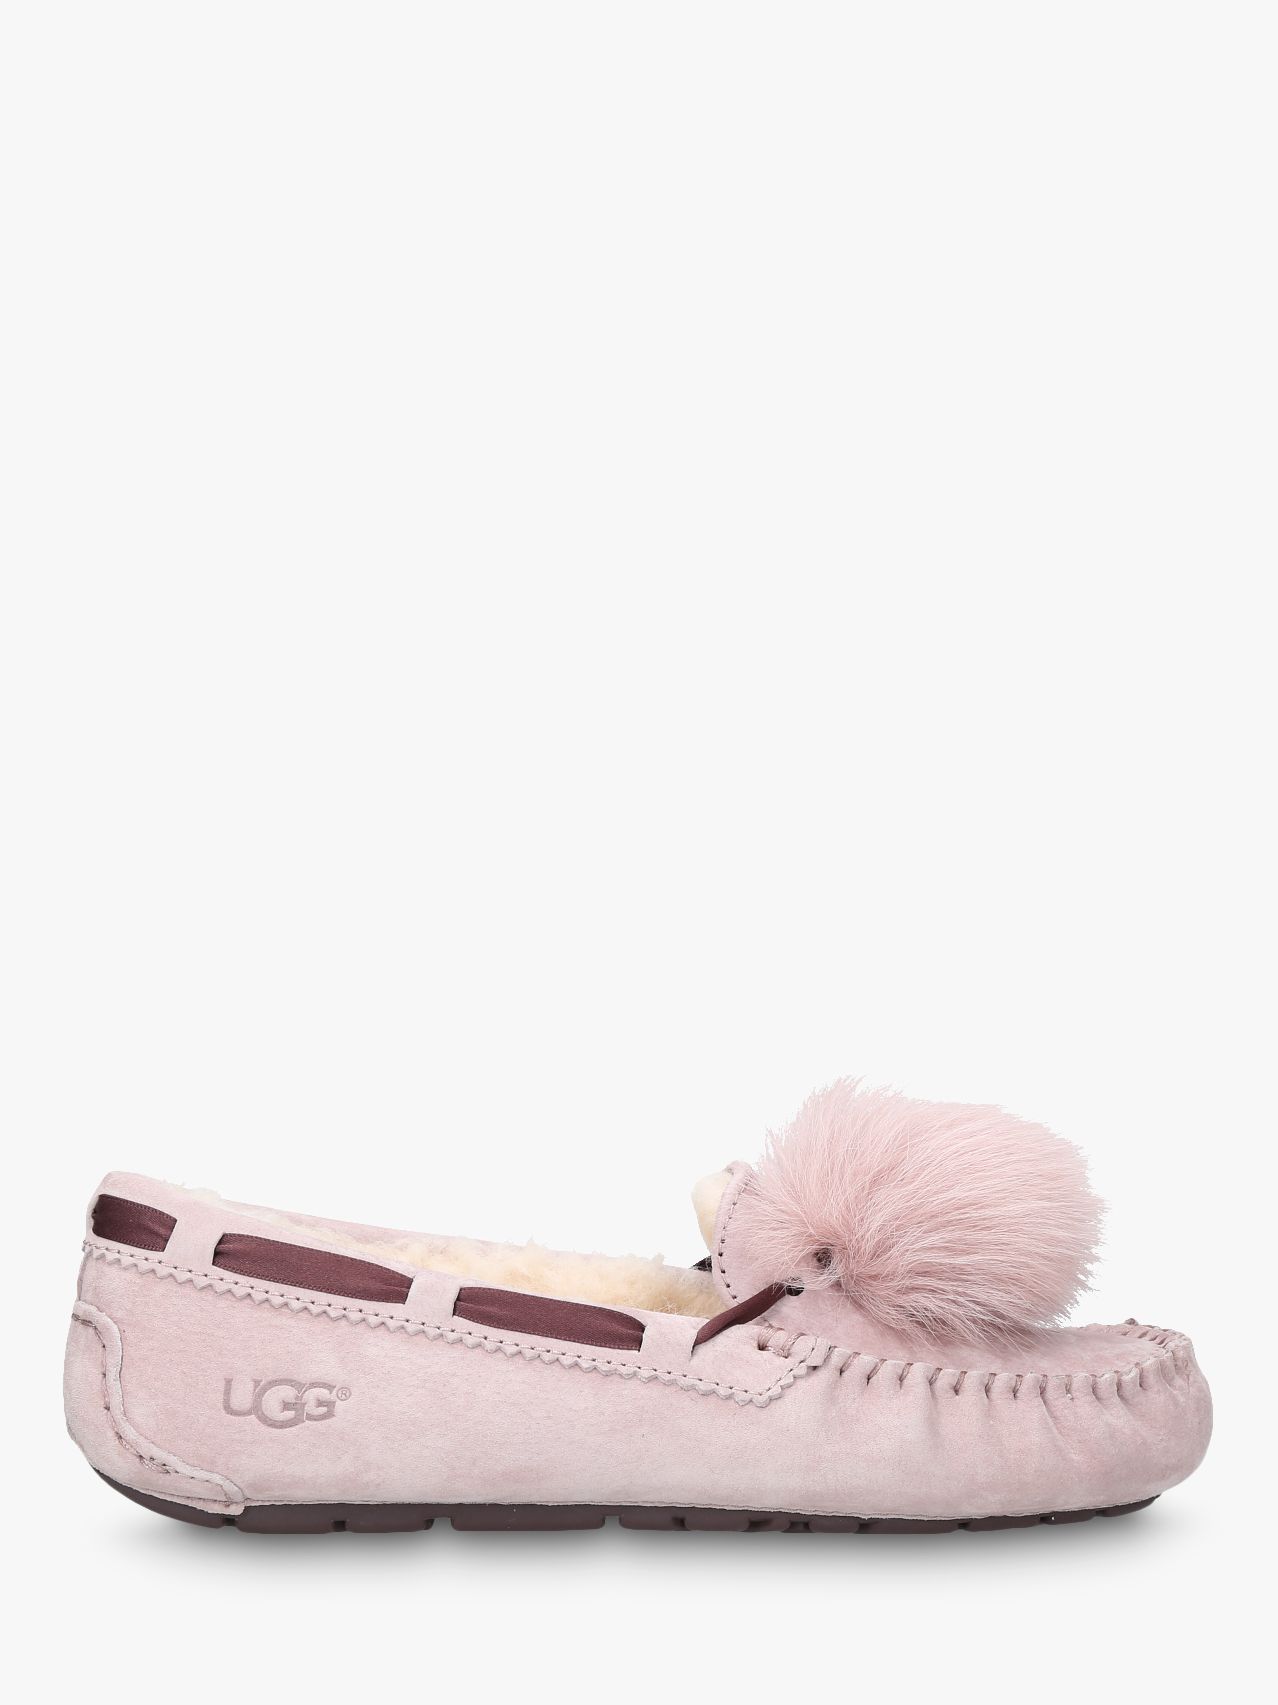 pink ugg moccasin slippers Cheaper Than 